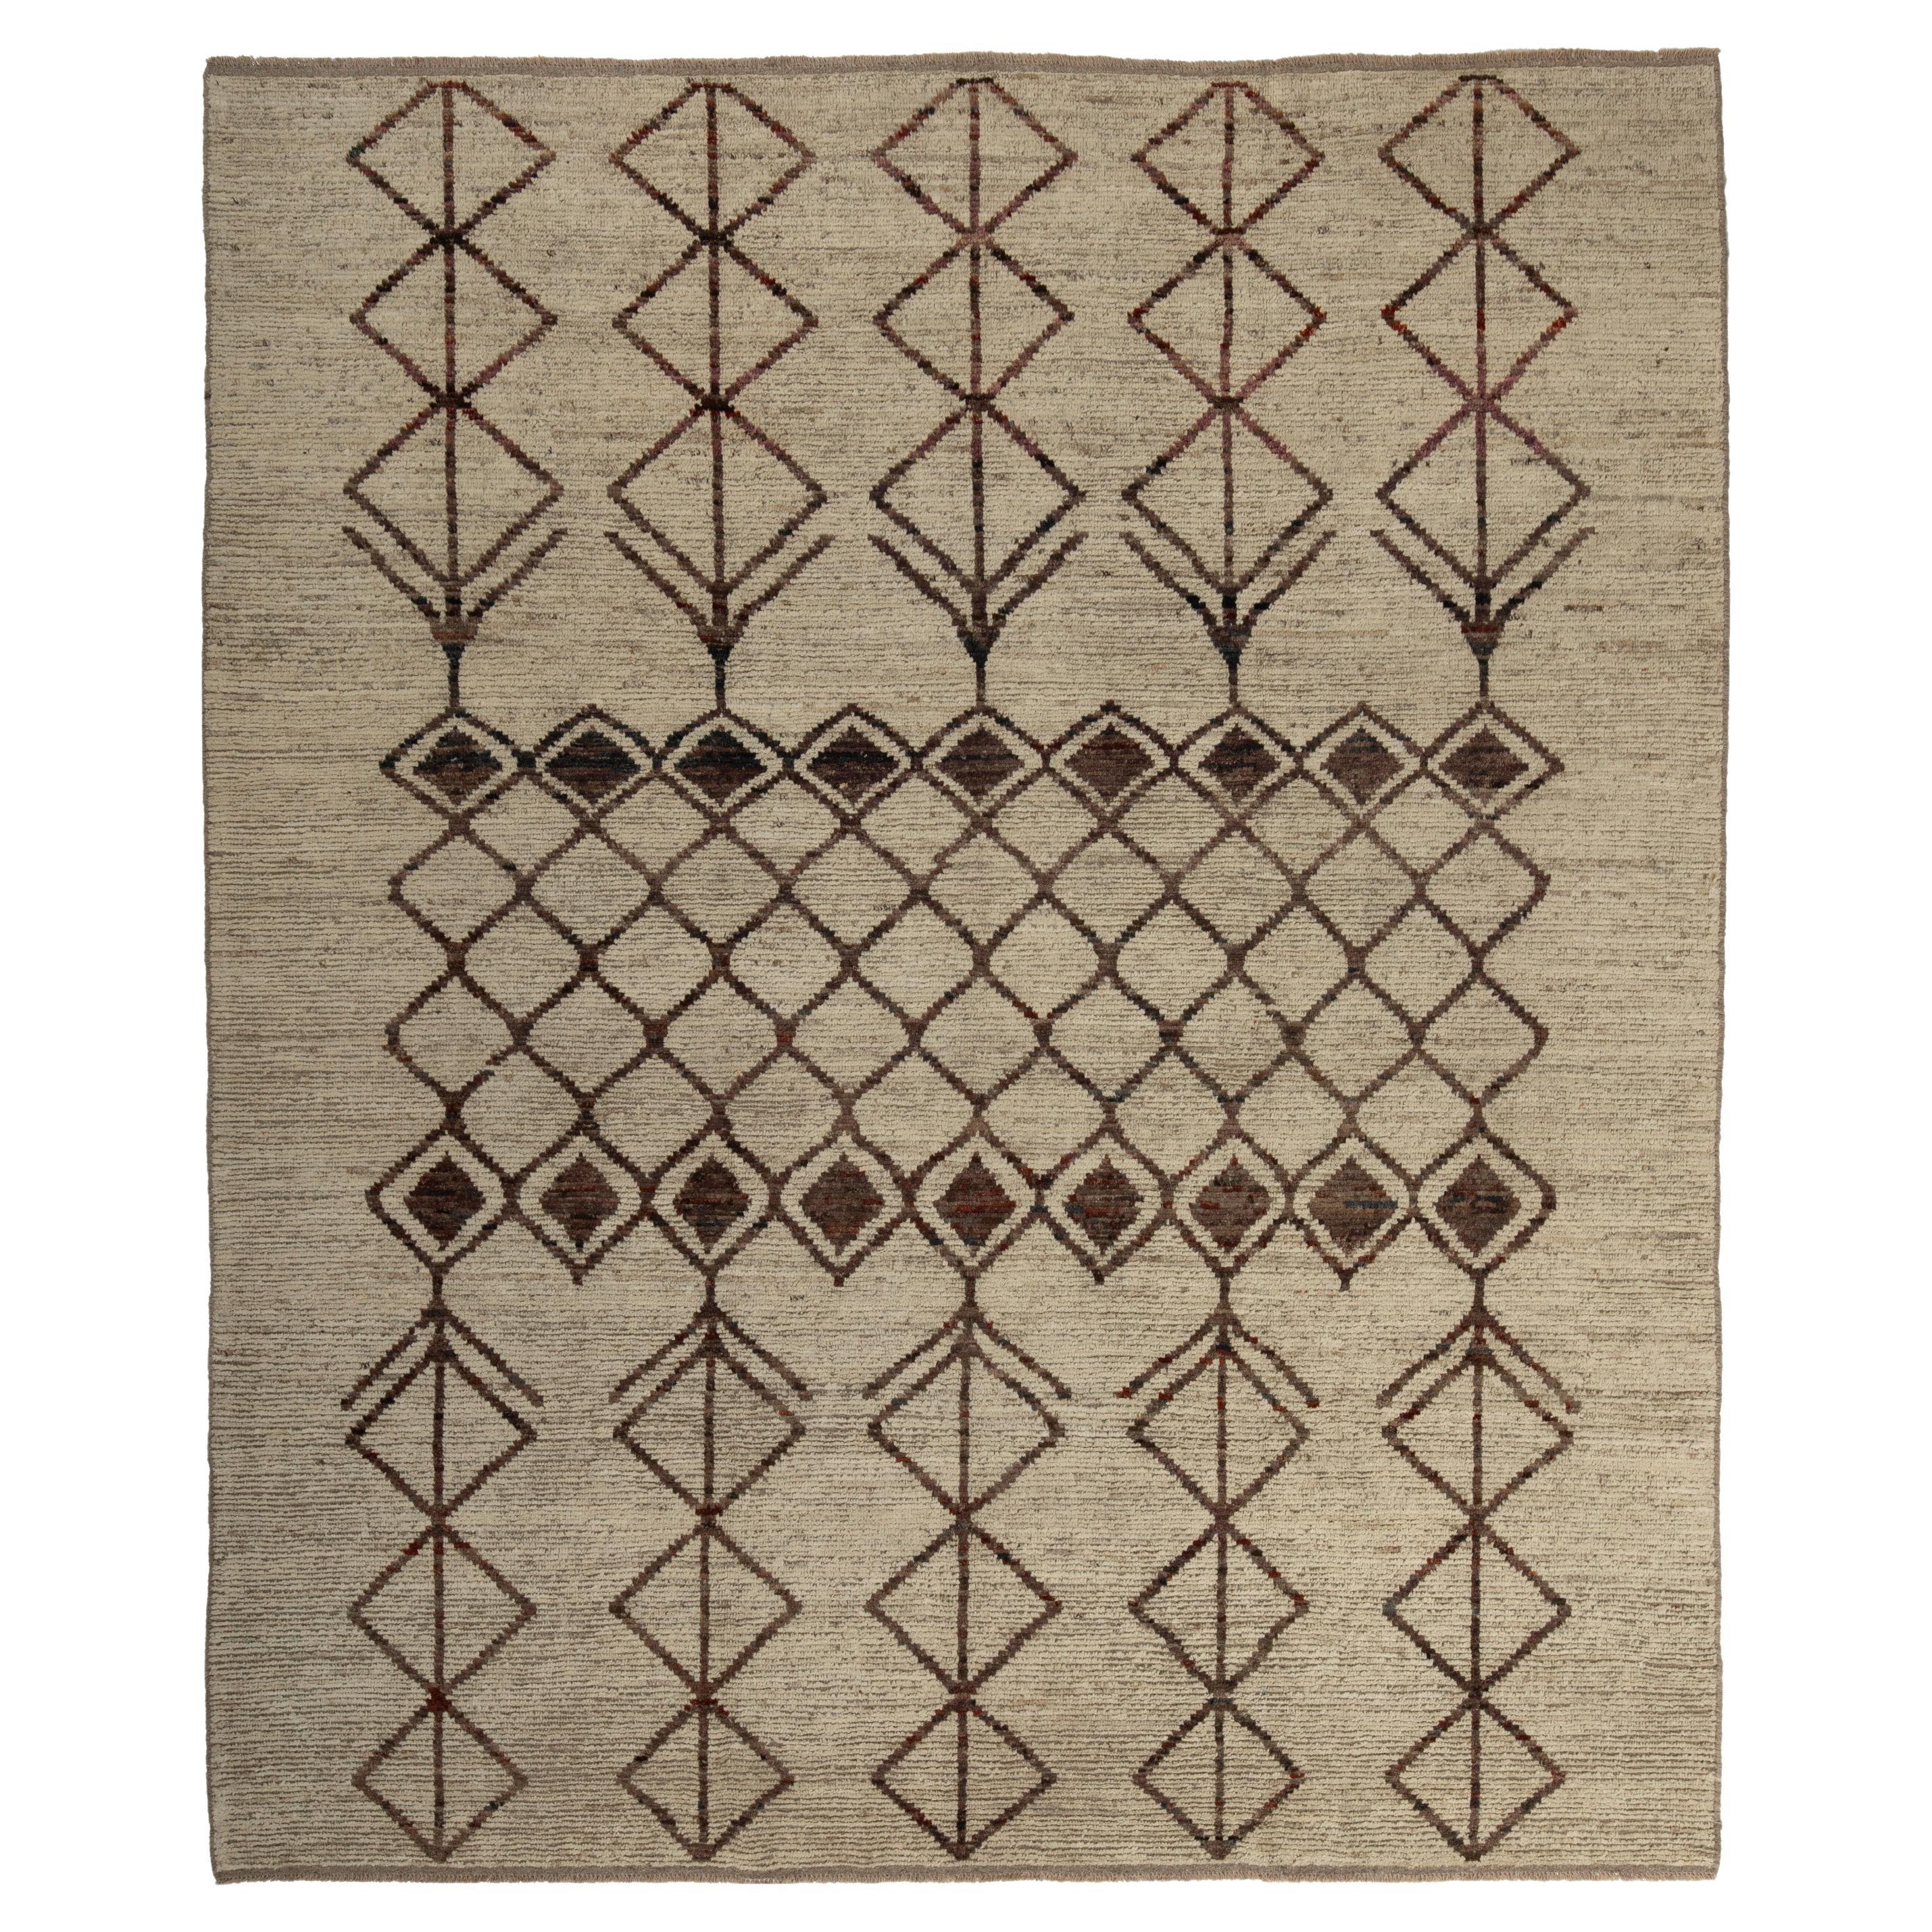 abc carpet Zameen Brown and Beige Tribal Wool Rug - 8'11" x 9'10" For Sale